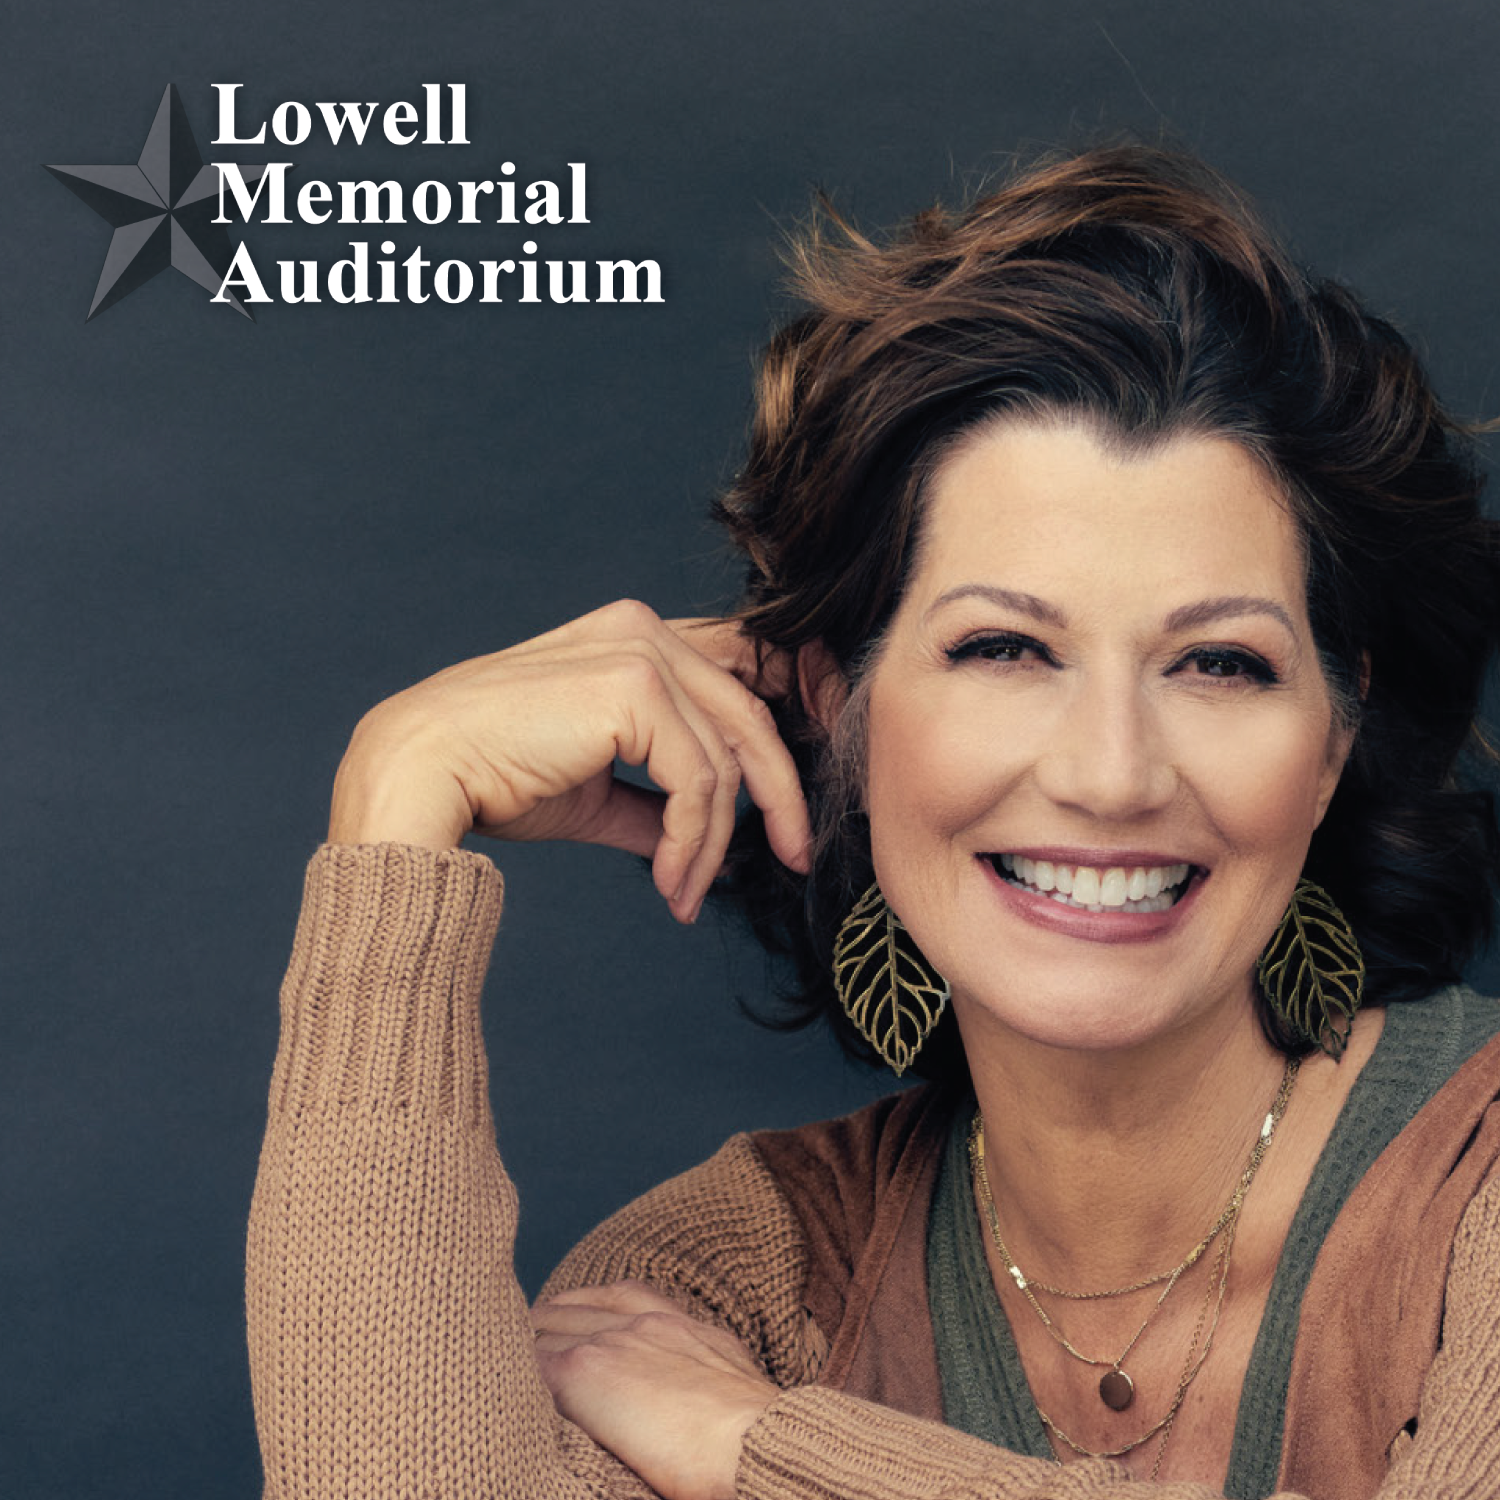 "Amy Grant" performs at the Lowell Memorial Auditorium (Lowell, MA.)